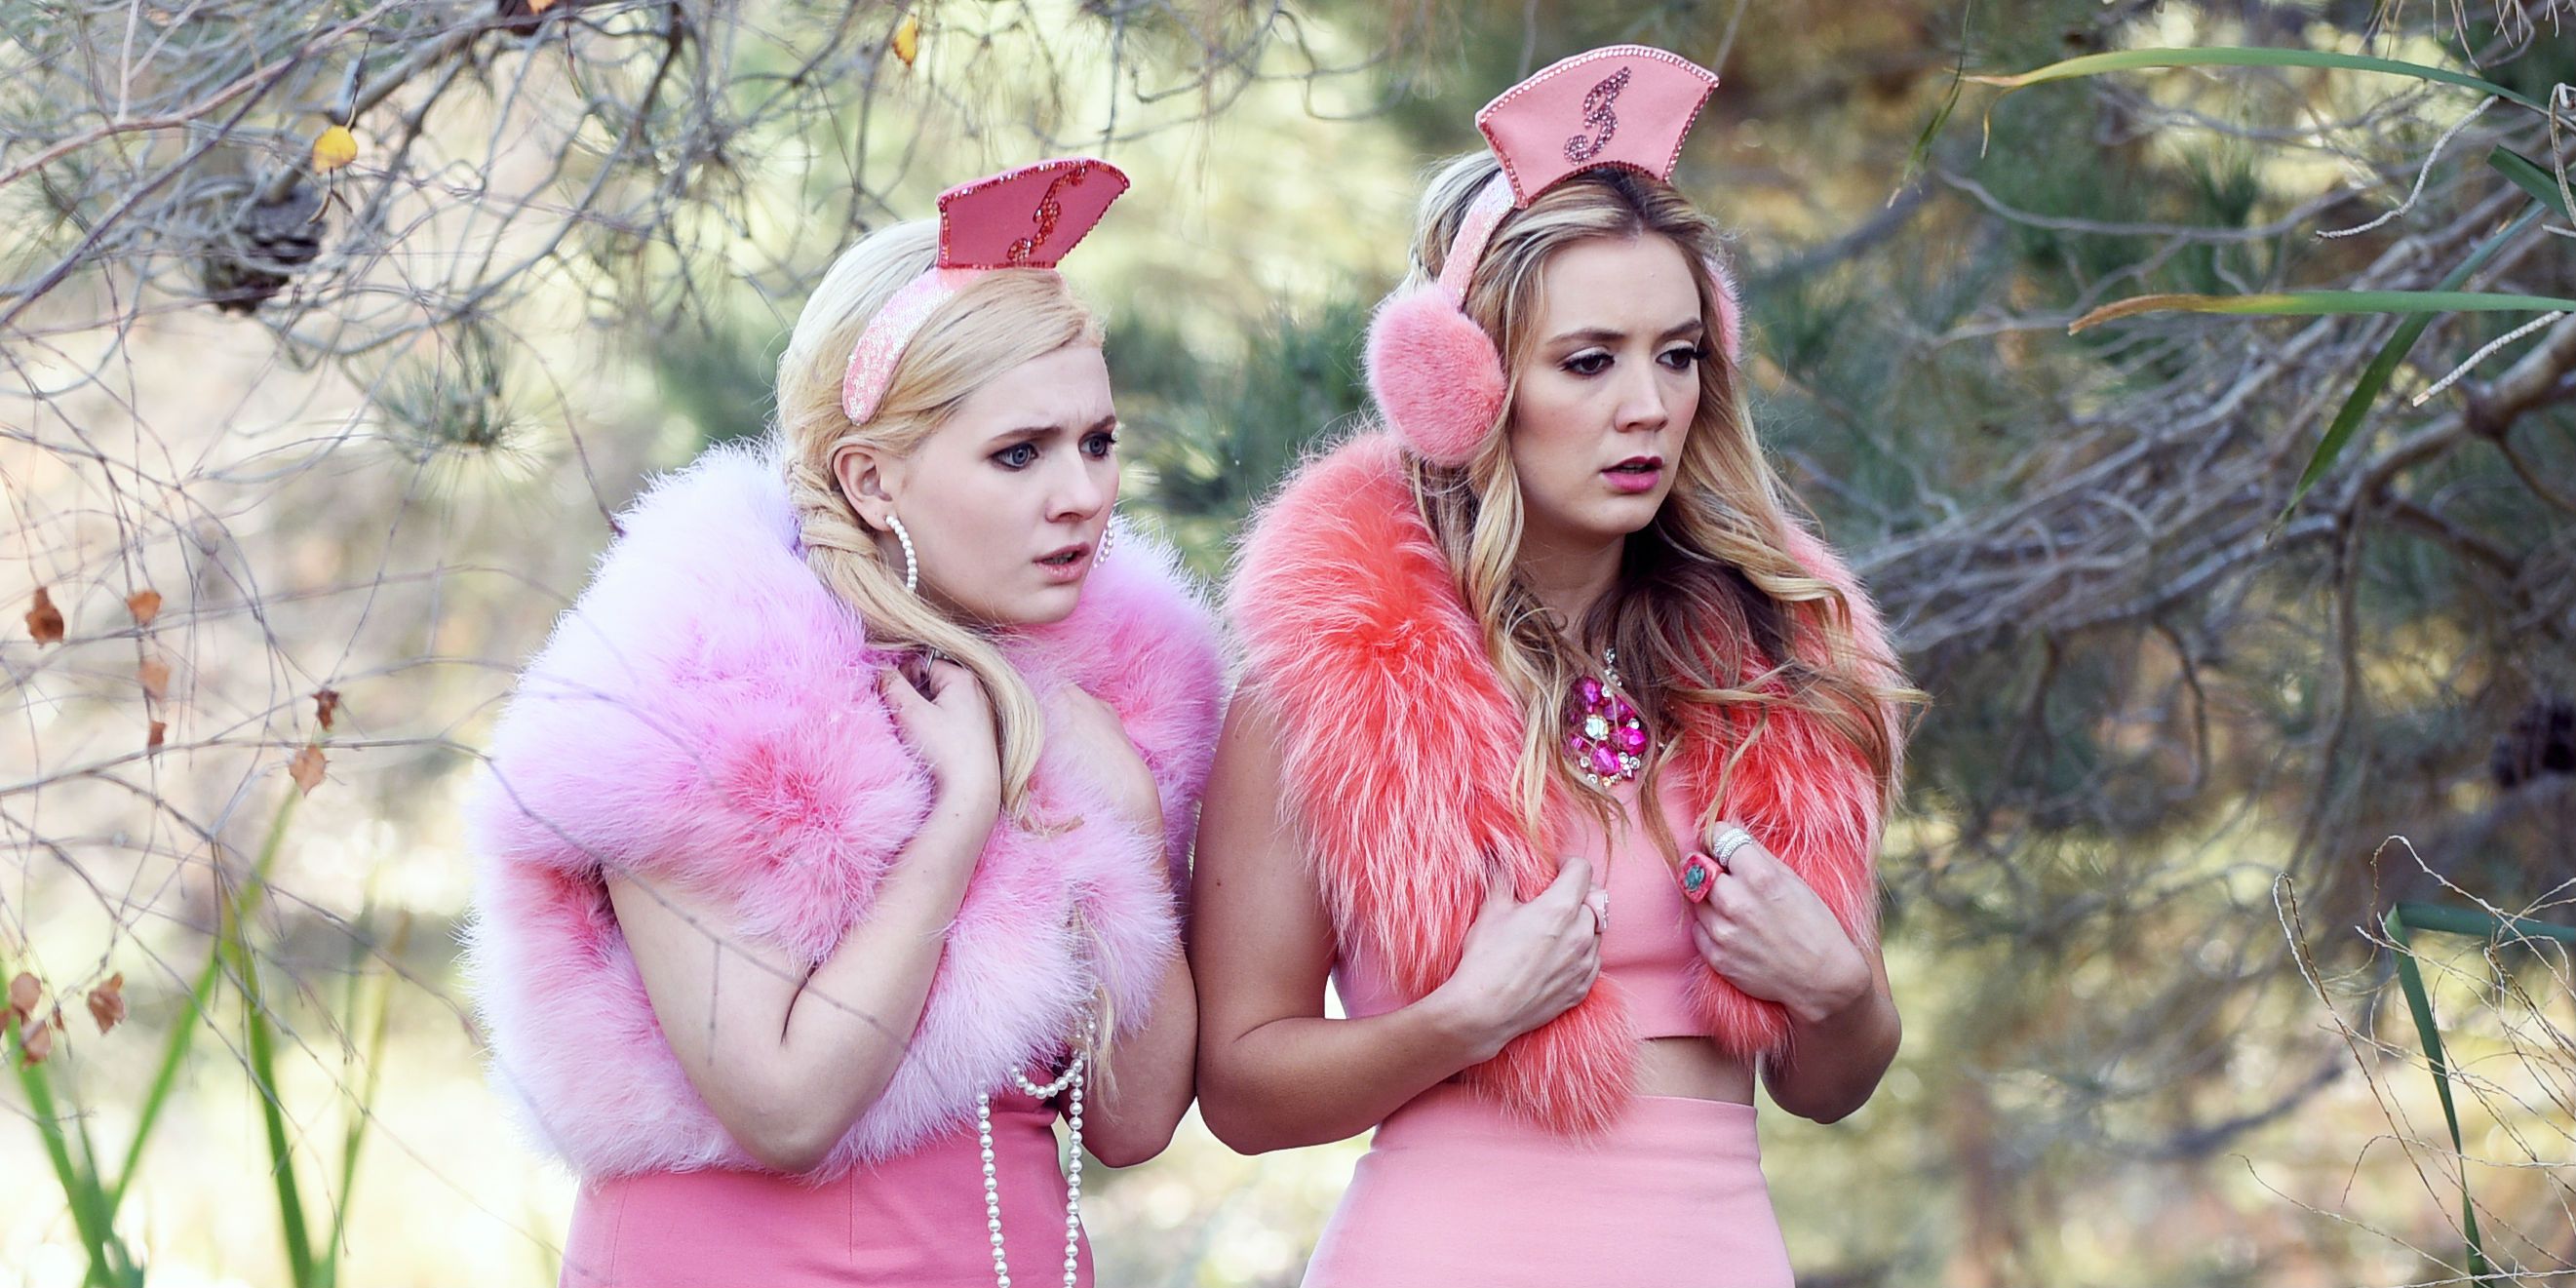 Chanel 5 and Chanel 3 wearing pink outfits looking scared outside in Scream Queens